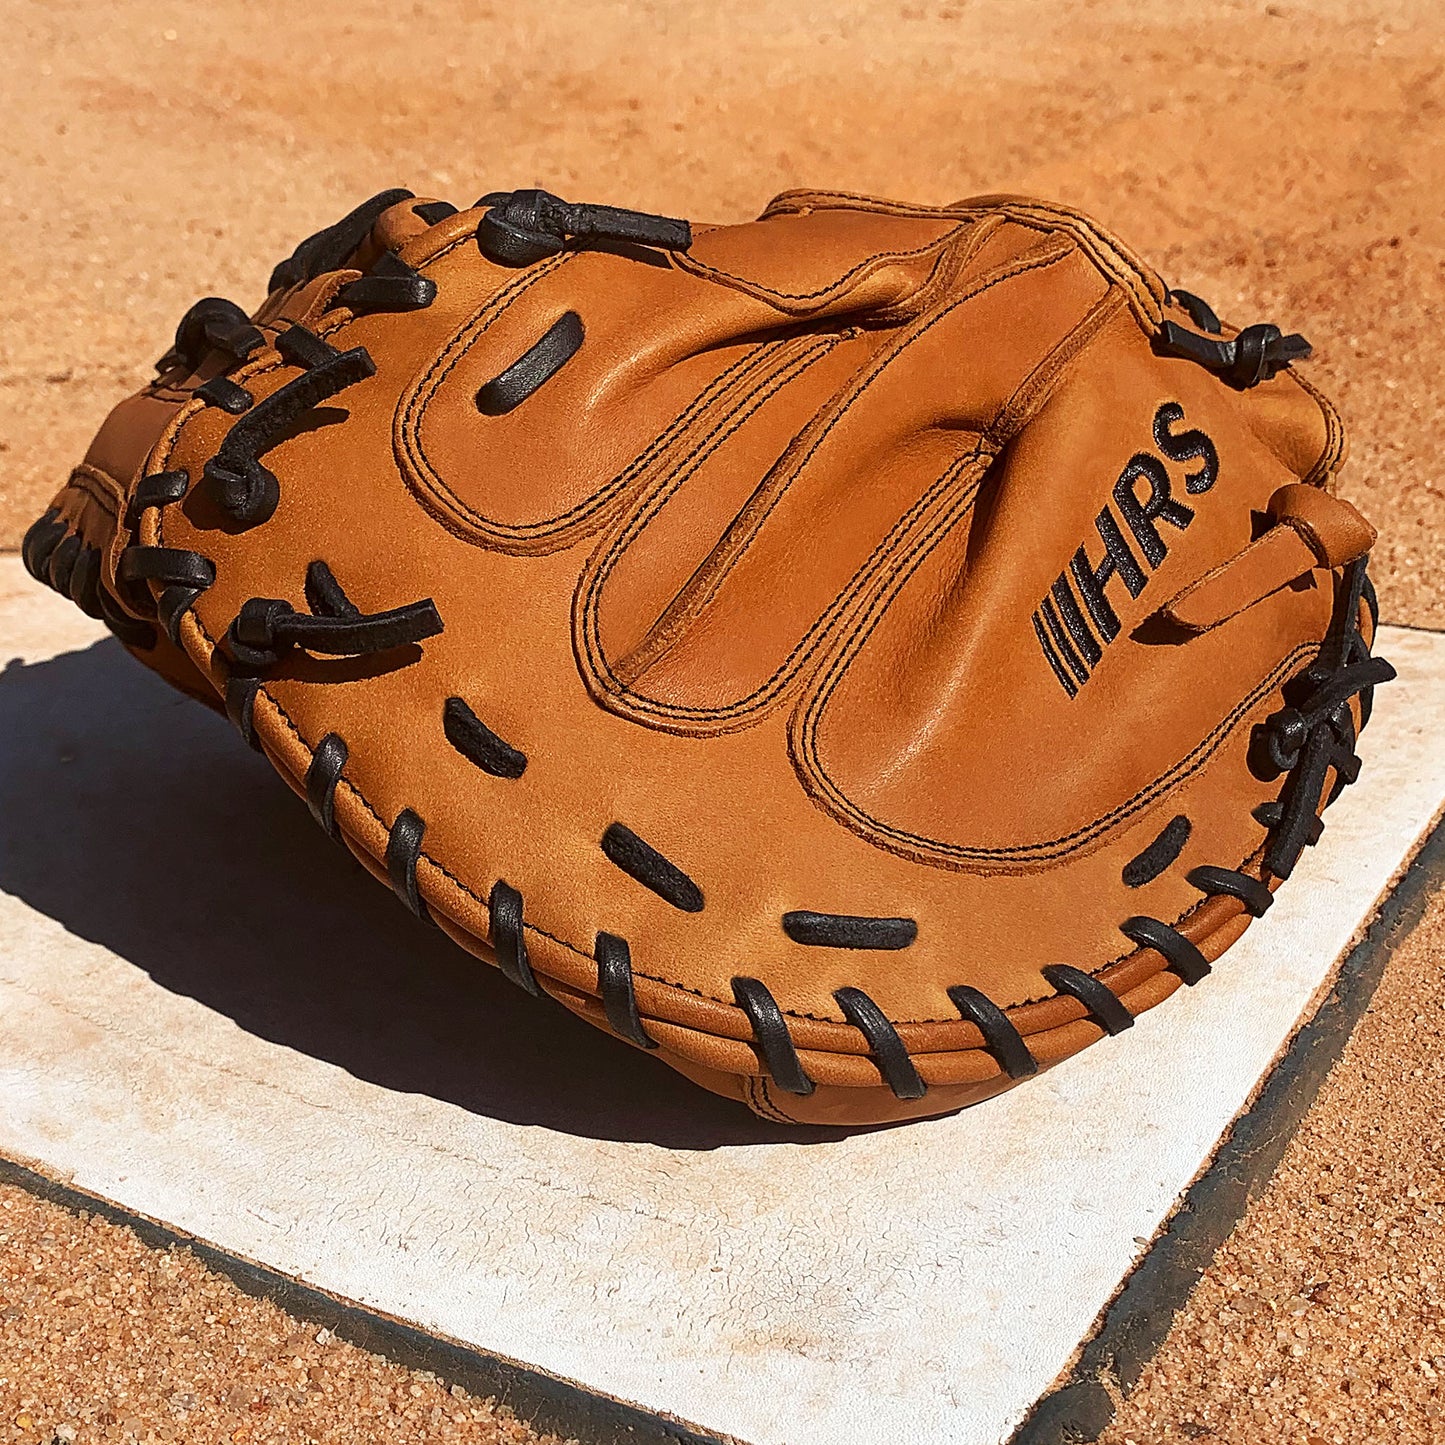 33.5" Baseball Catcher's Mitt - Tan with Black Laces